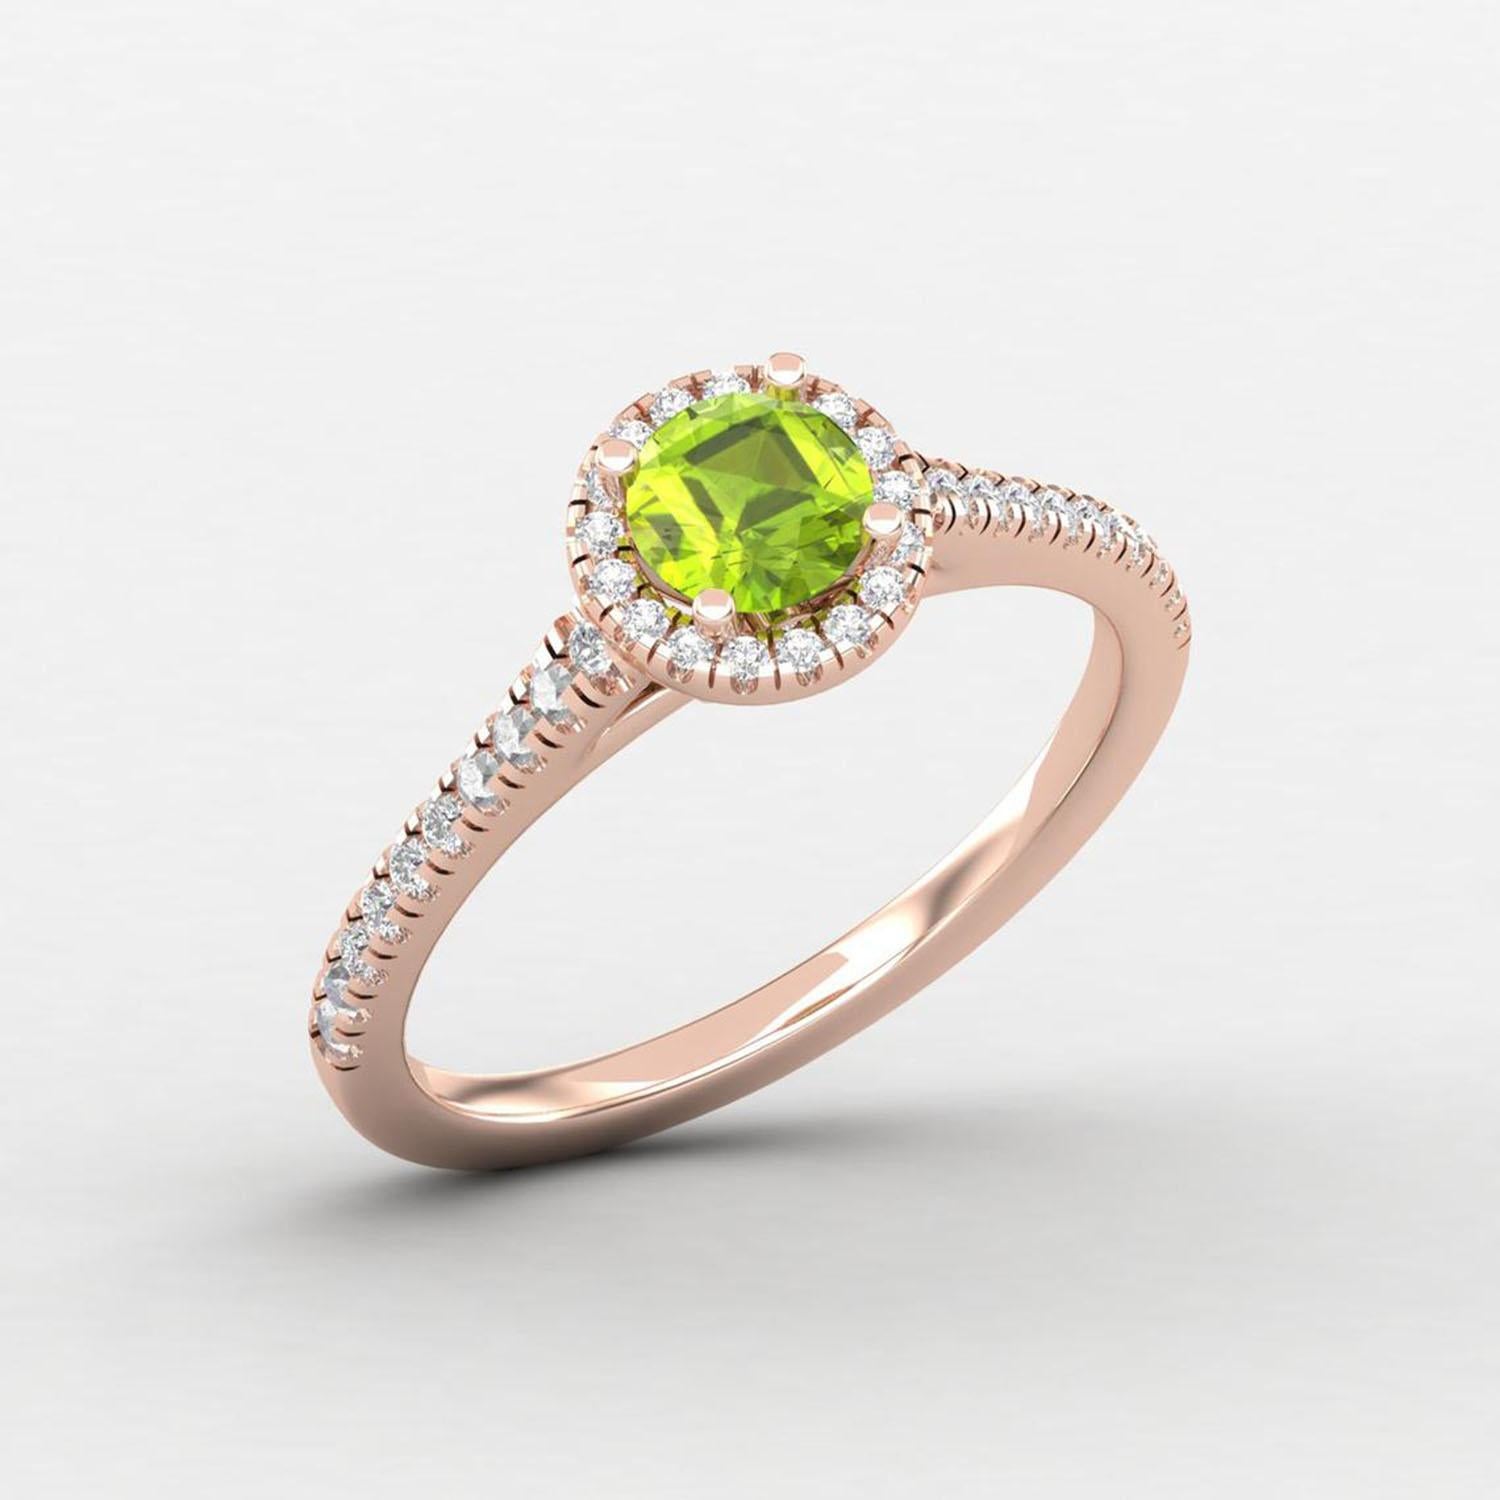 14 Karat Gold Peridot Ring / Round Diamond Ring / Solitaire Ring For Sale 7